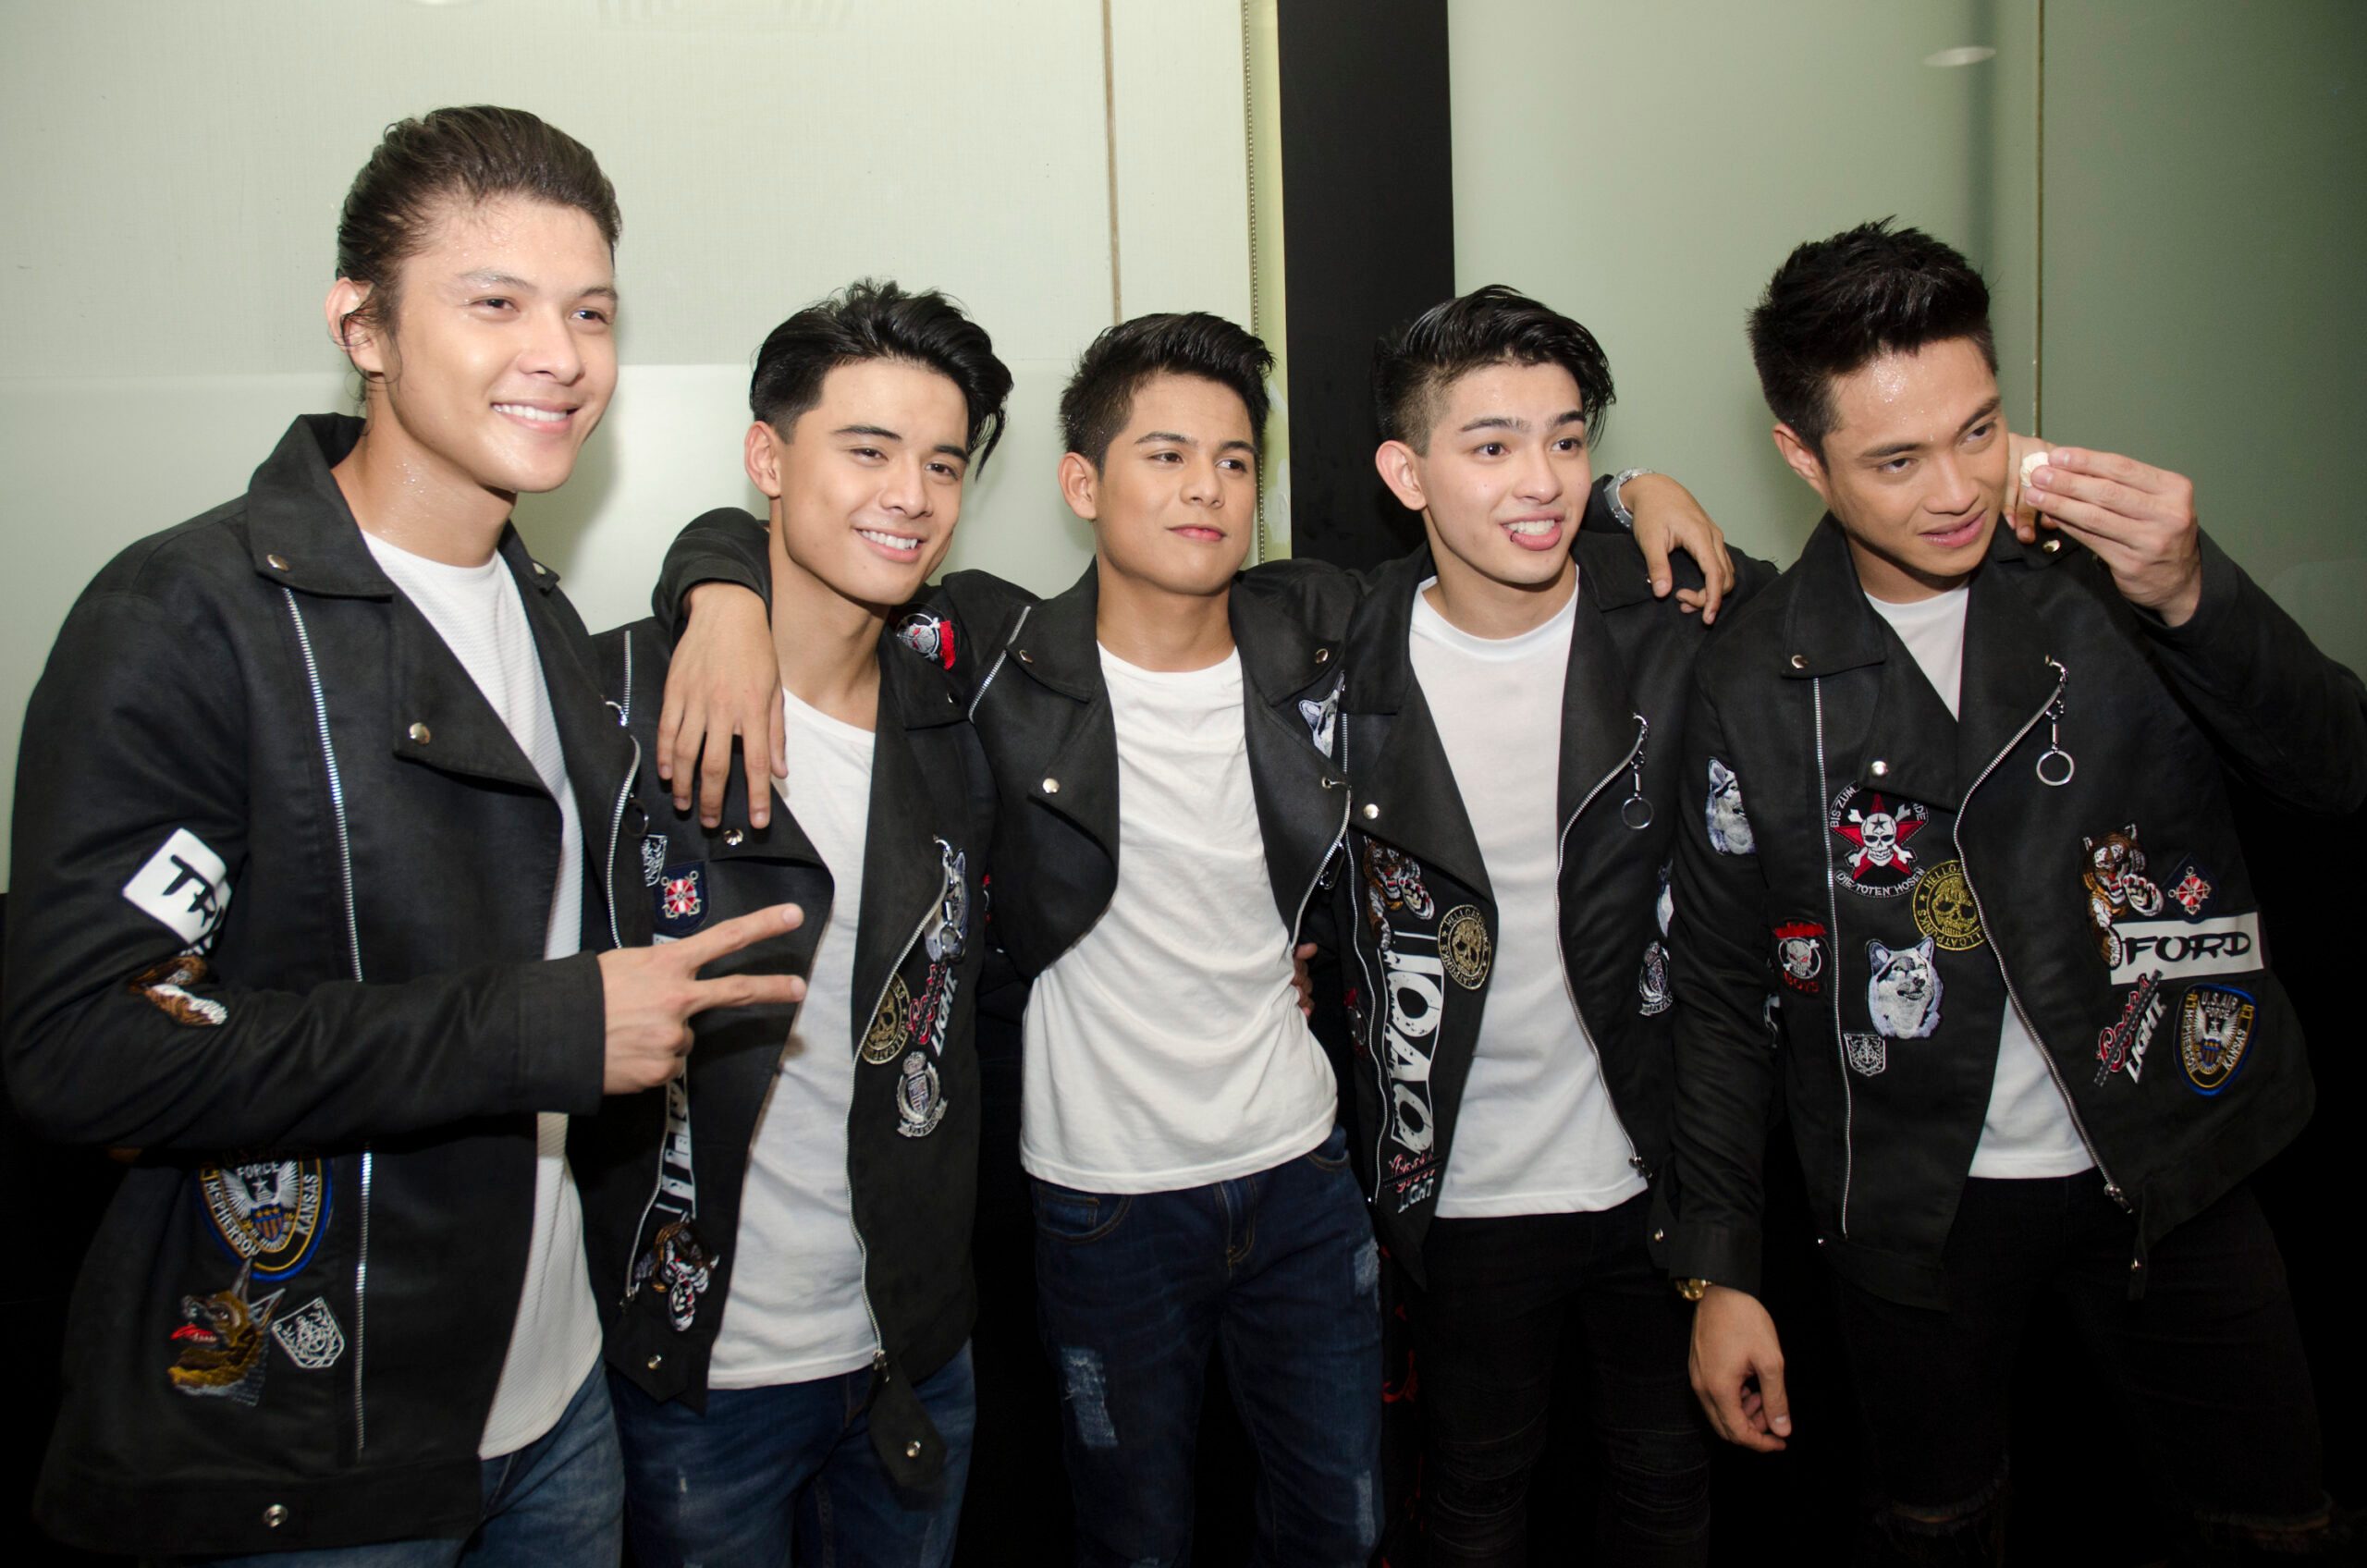 BoybandPH: 6 things to know about the ‘Pinoy Boyband Superstar’ winners